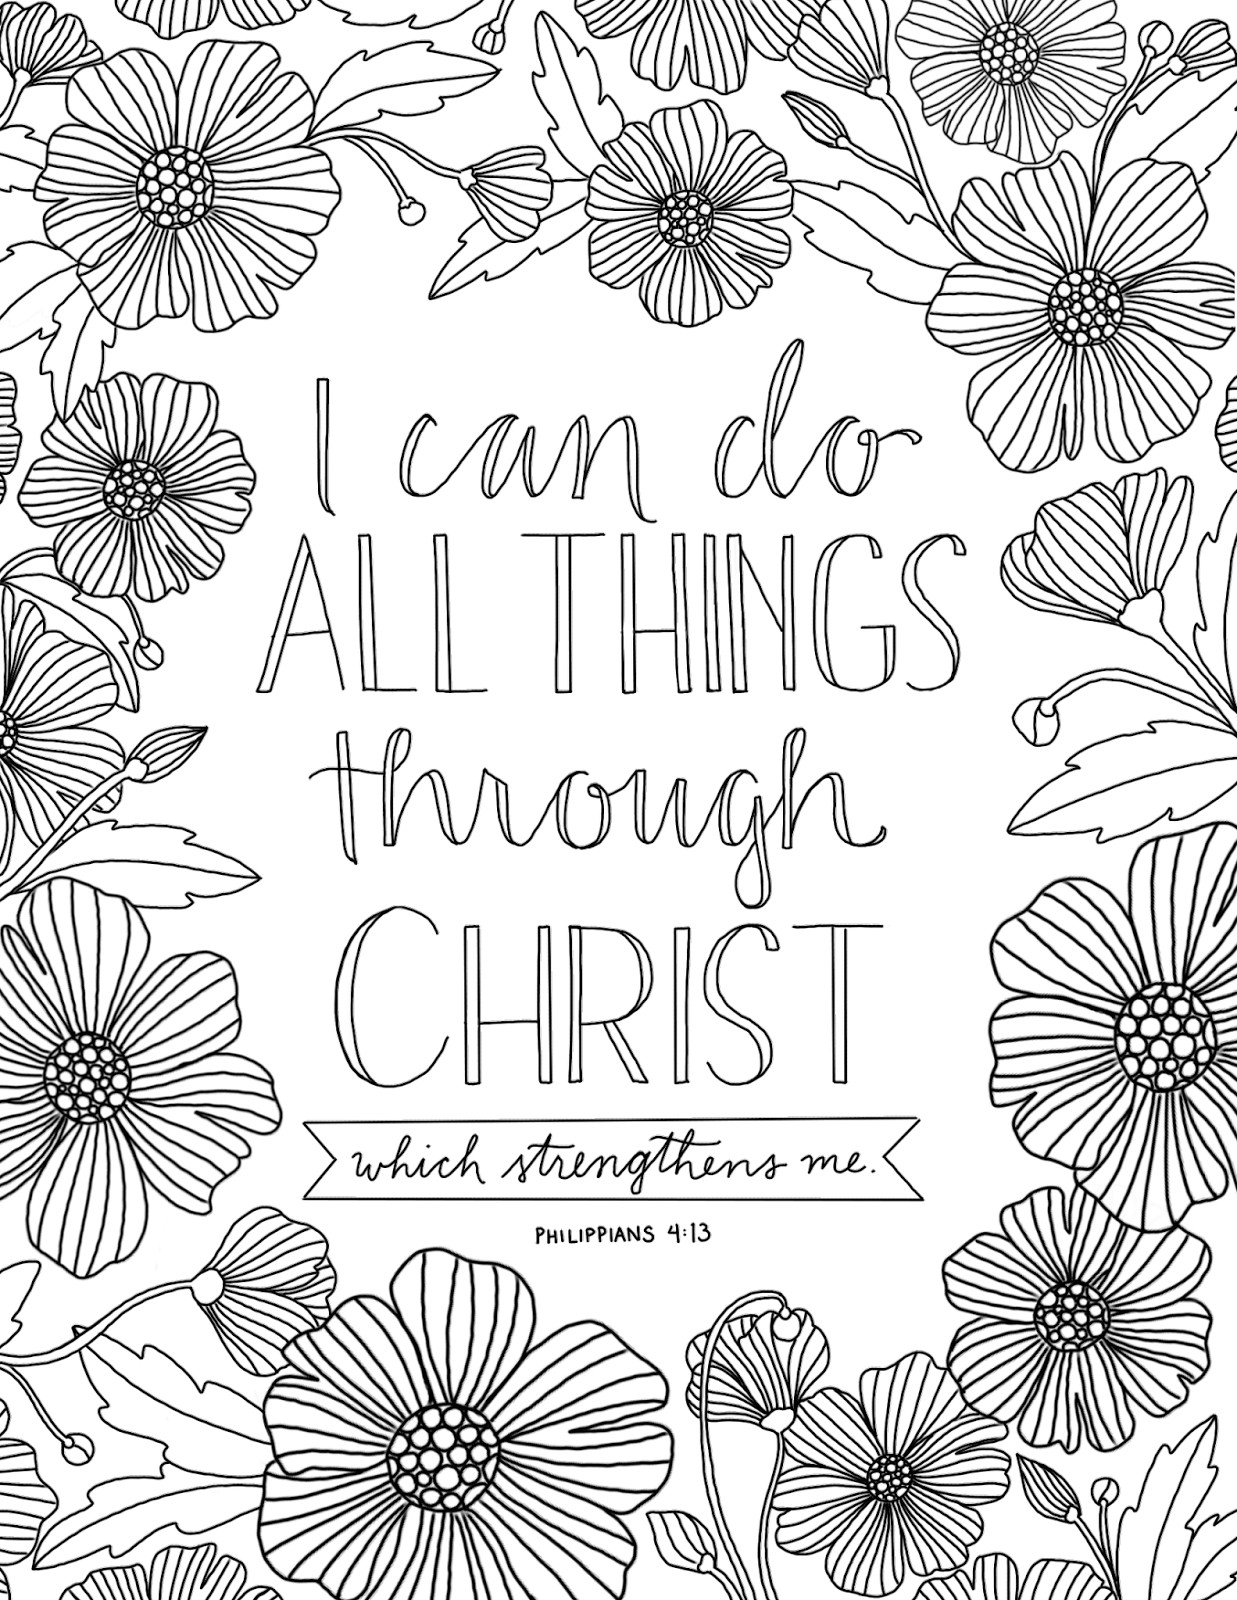 Printable Bible Verse Coloring Pages
 just what i squeeze in All Things through Christ